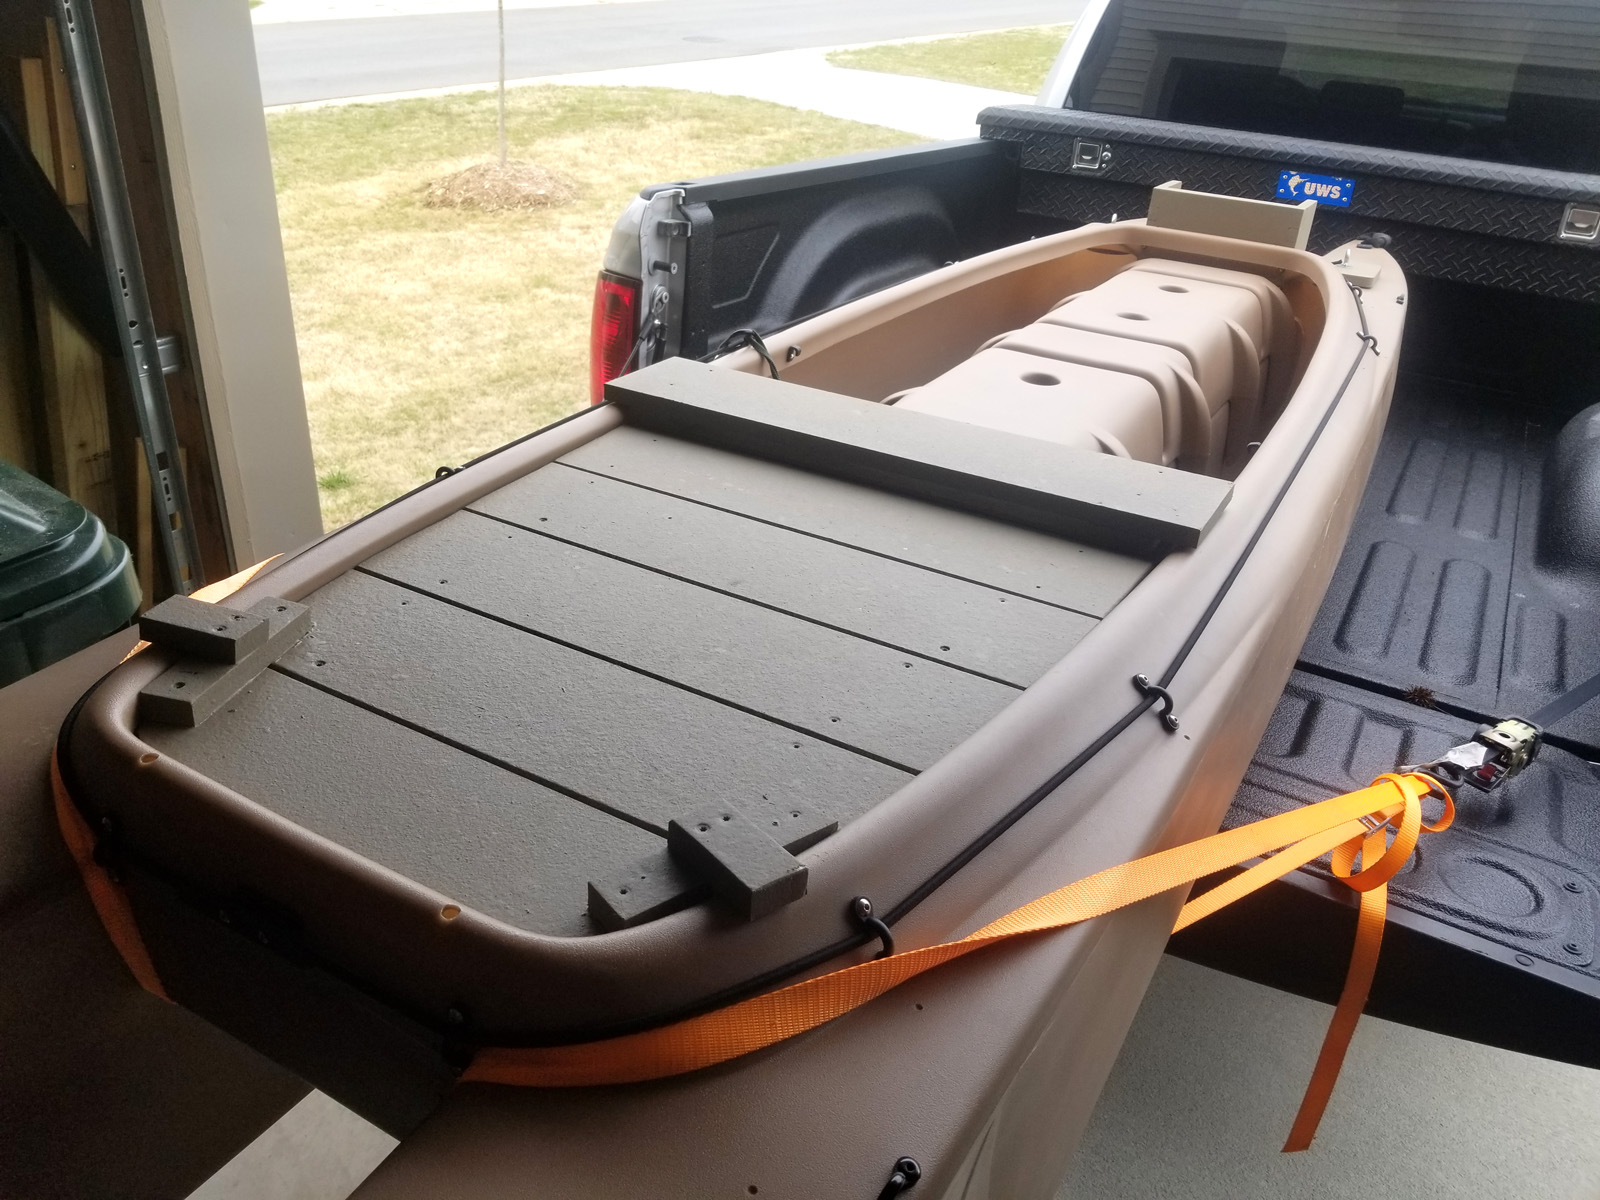 W700, because of the versatility – STABLE KAYAKS AND MICROSKIFFS MADE BY  WAVEWALK